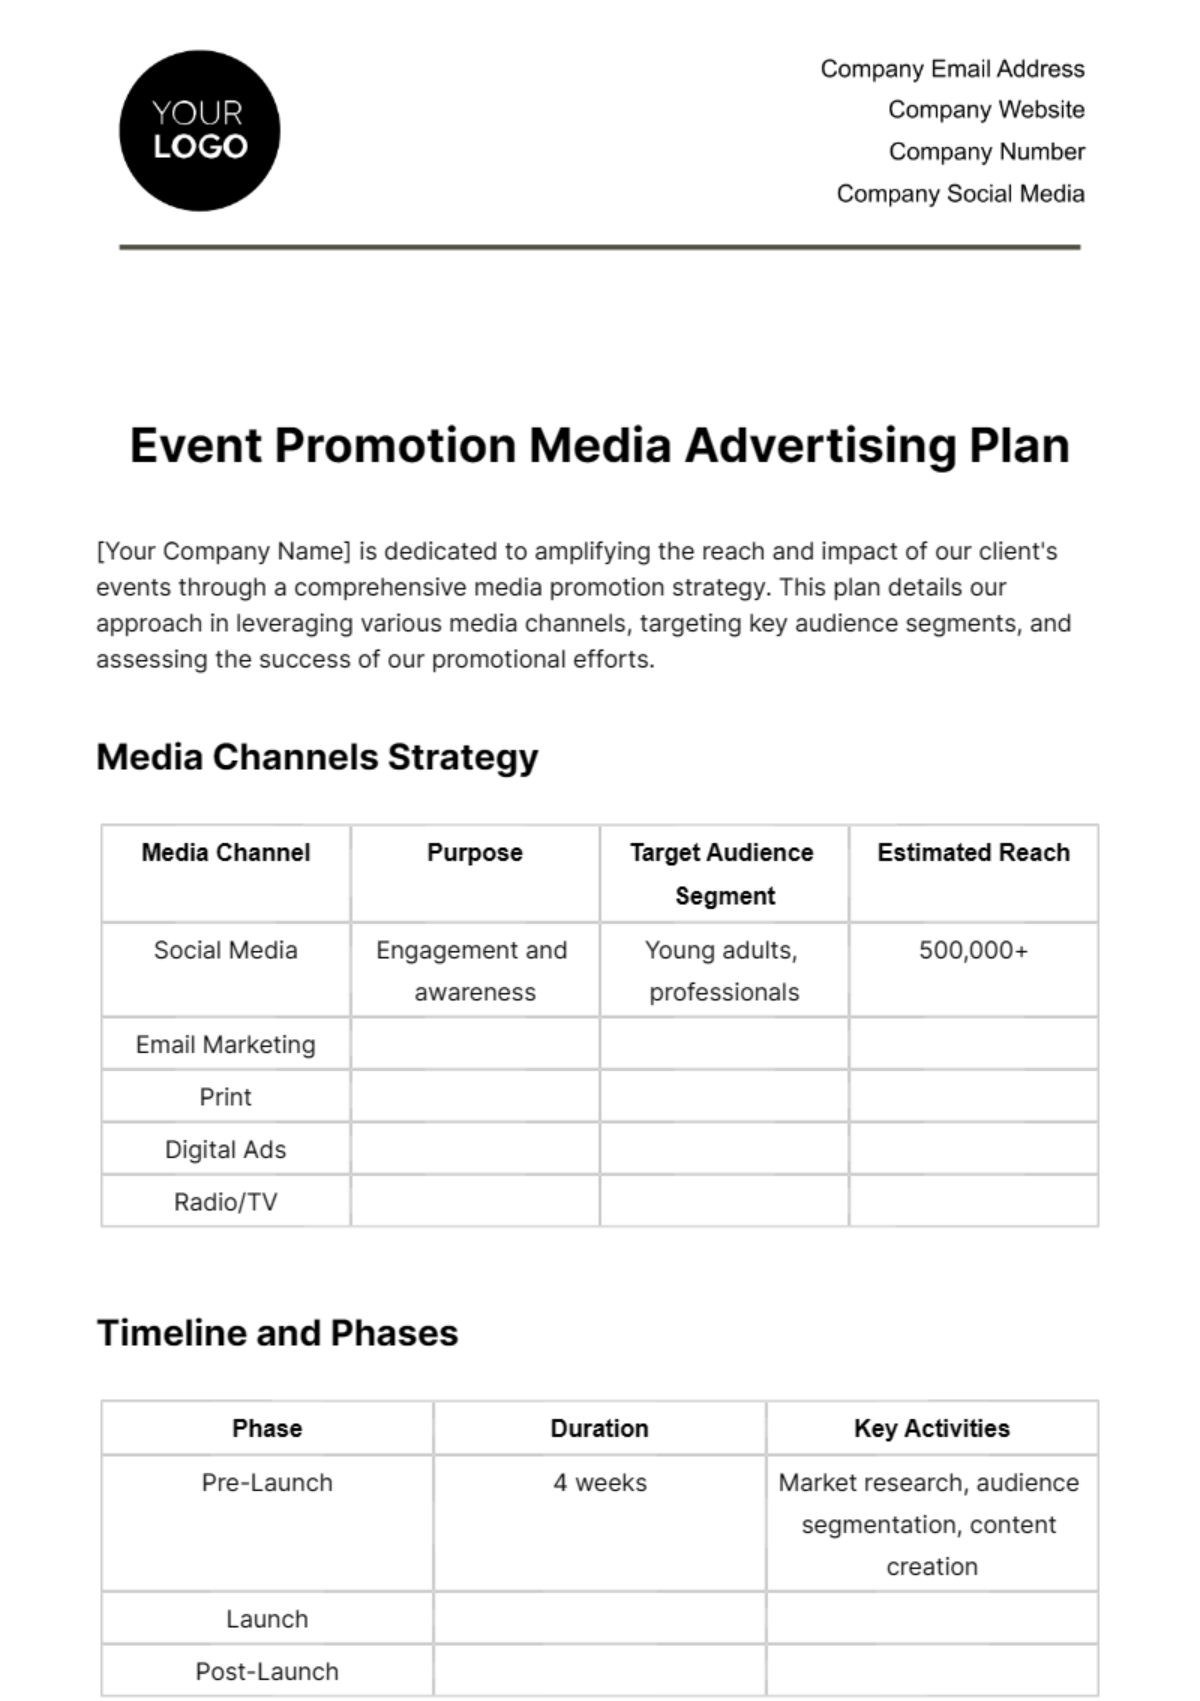 Free Event Promotion Media Advertising Plan Template